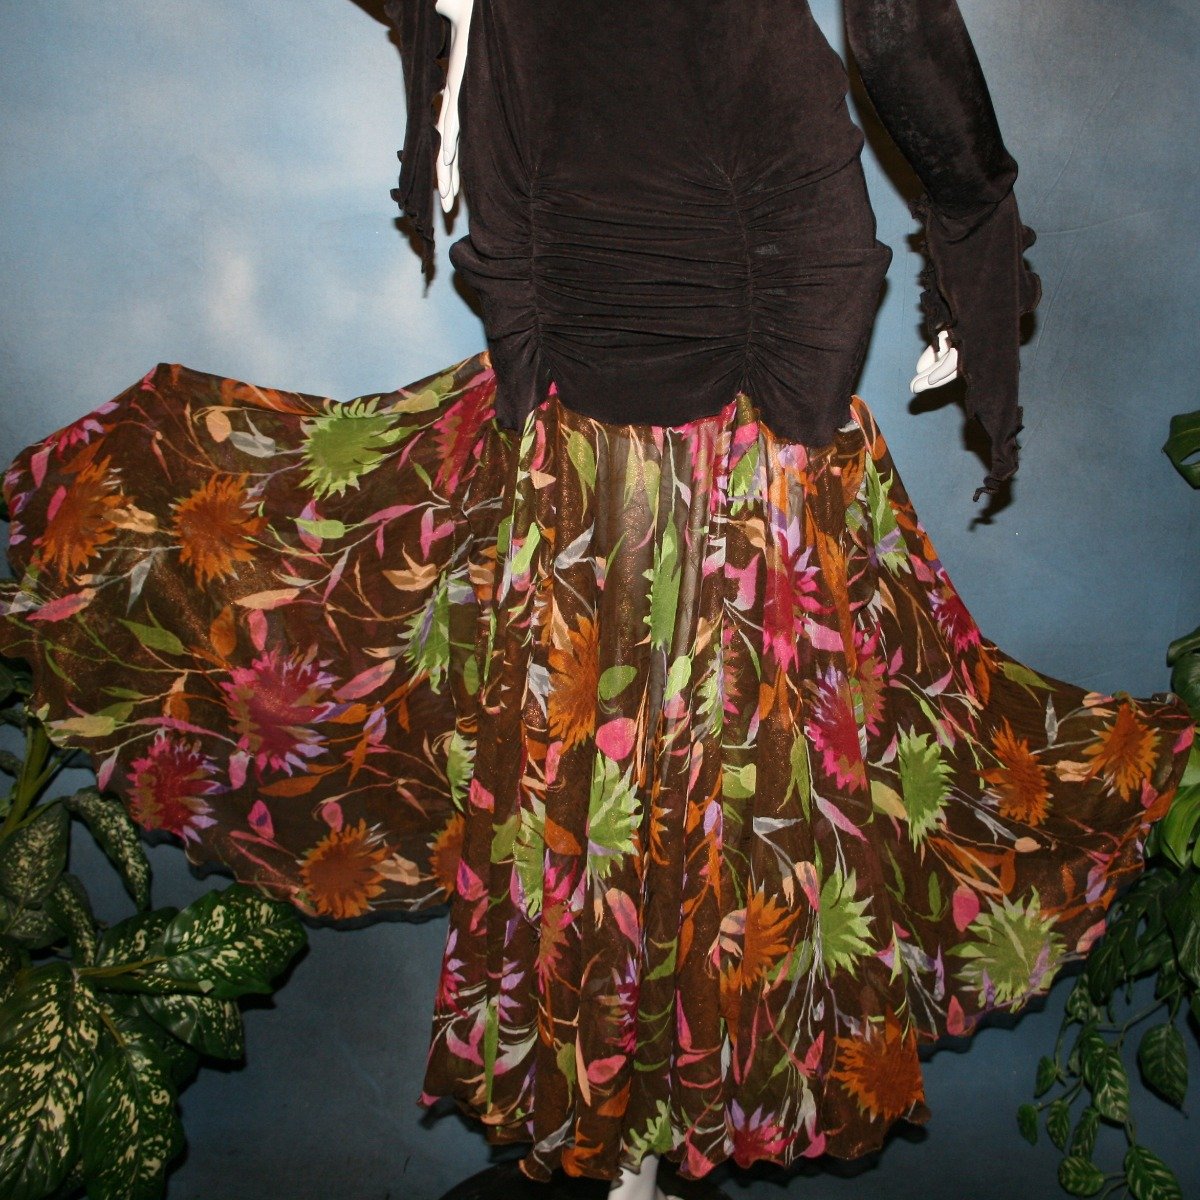 Crystal's Creations lower back view of Deep chocolate brown social ballroom dress created of luxurious deep chocolate brown solid slinky base featuring ruching through the hip area, & interesting long flared sleeves, with yards of fall colored flowers chiffon petal panels